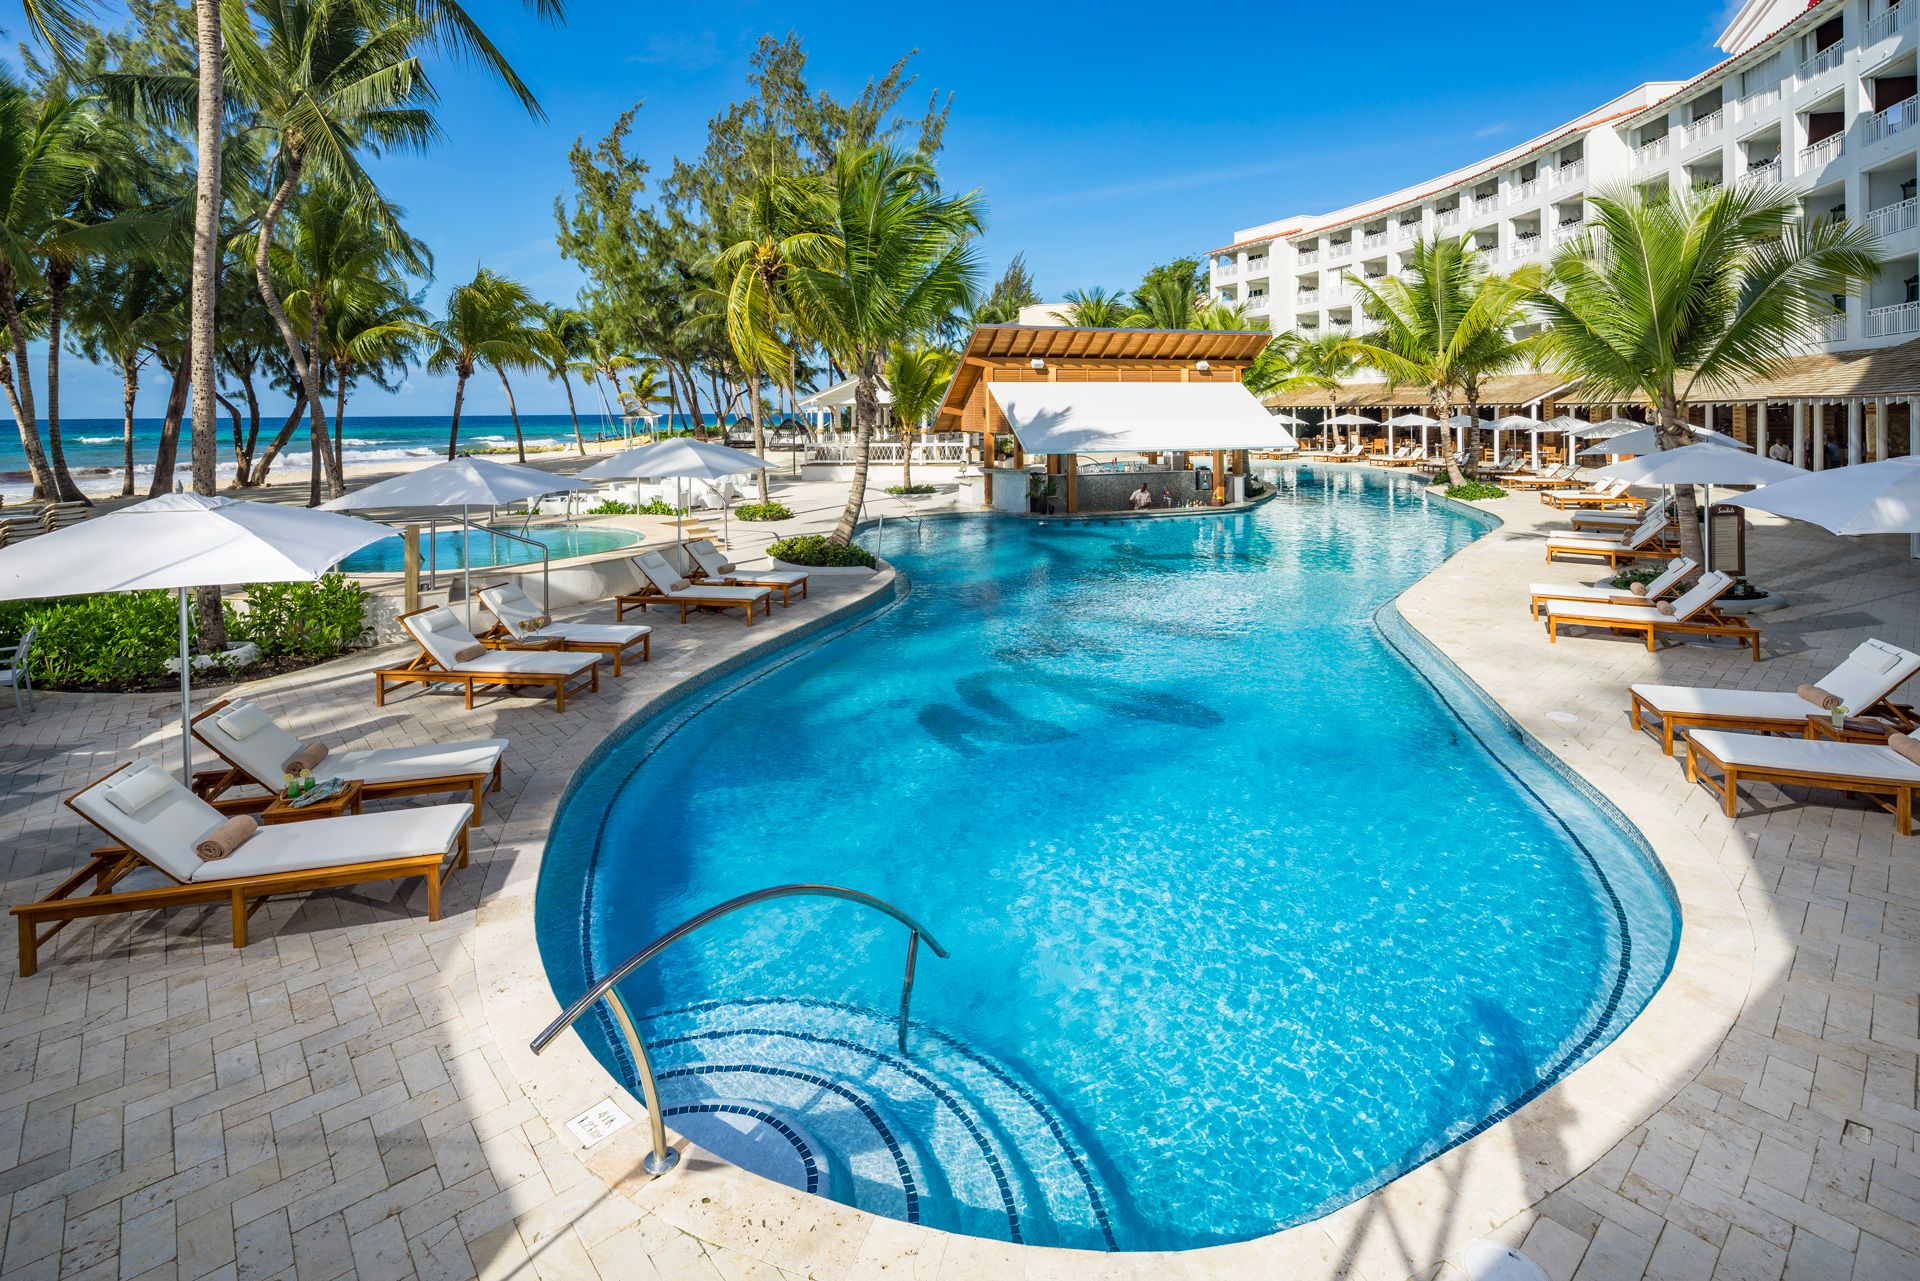 Three things guests love about... Sandals Barbados. A full review.